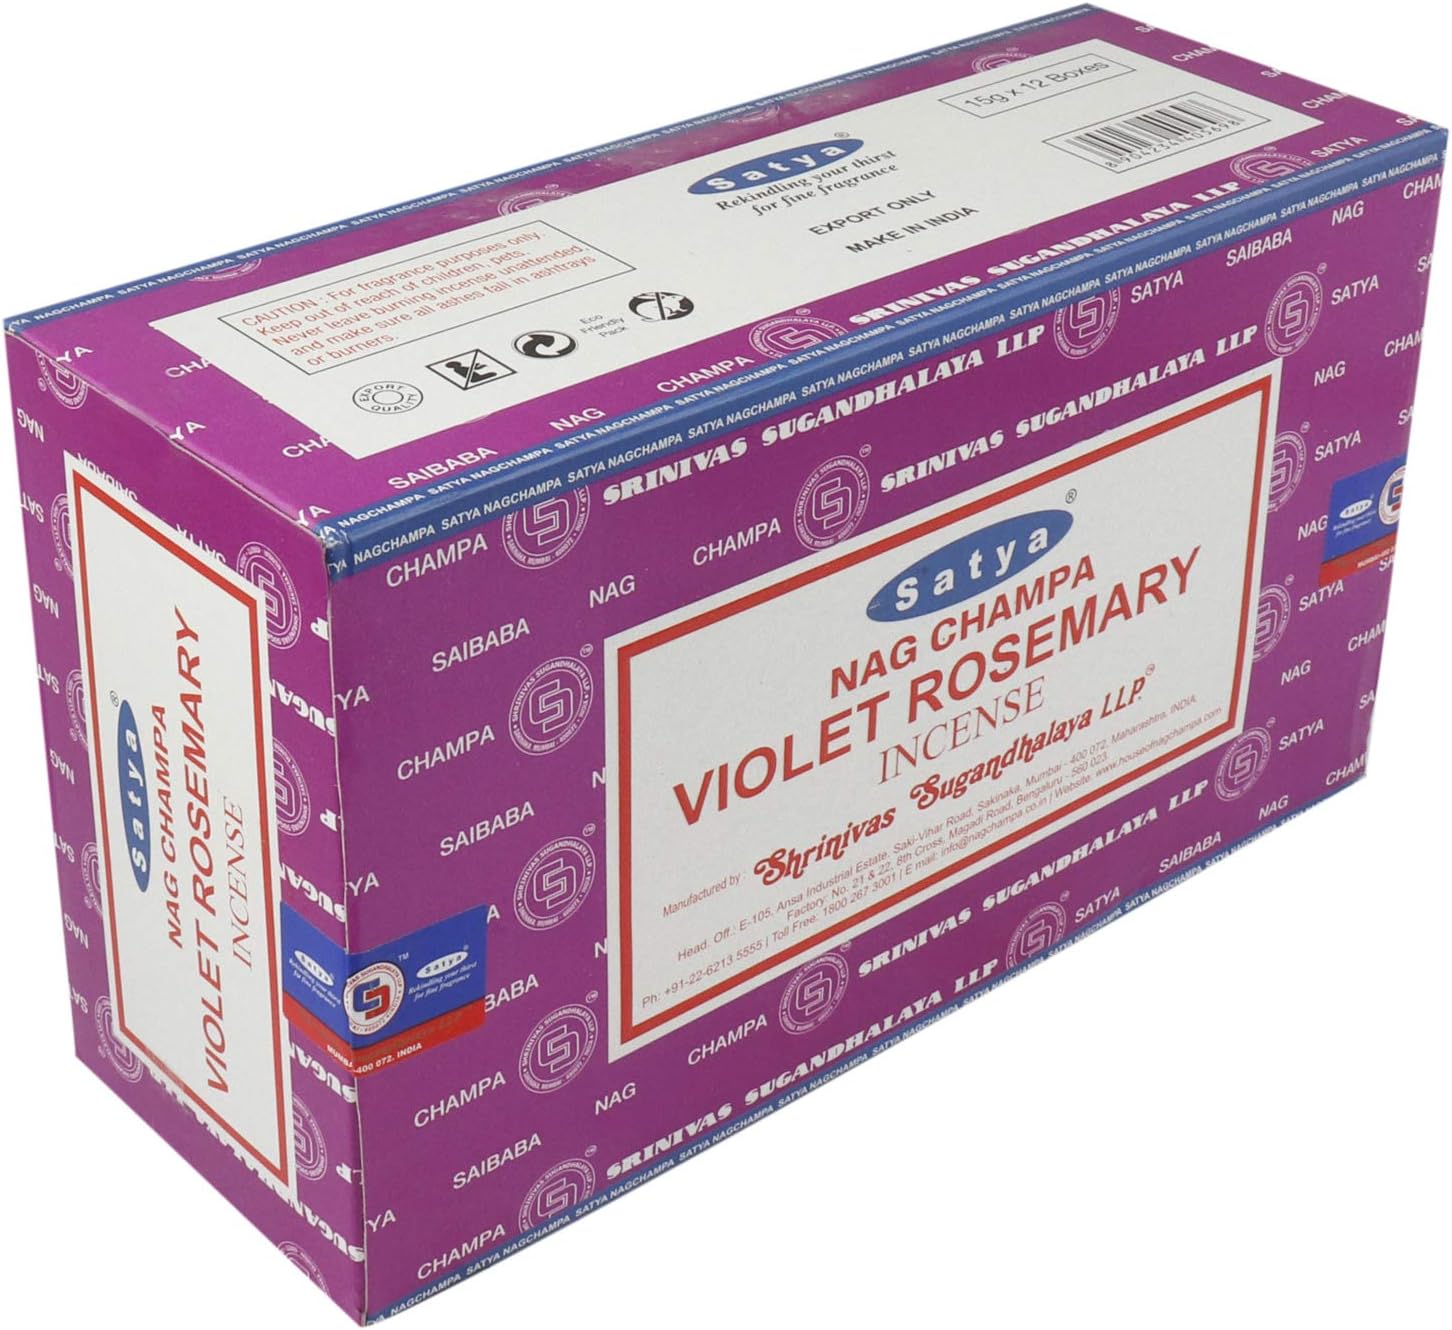 Sharvgun Satya Nag Champa Violet Rosemary Fragrance Incense Stick Pack of 12 Aggarbatti Home Scent Fragrance Aromatherapy 15G X 12 Pack (180G)